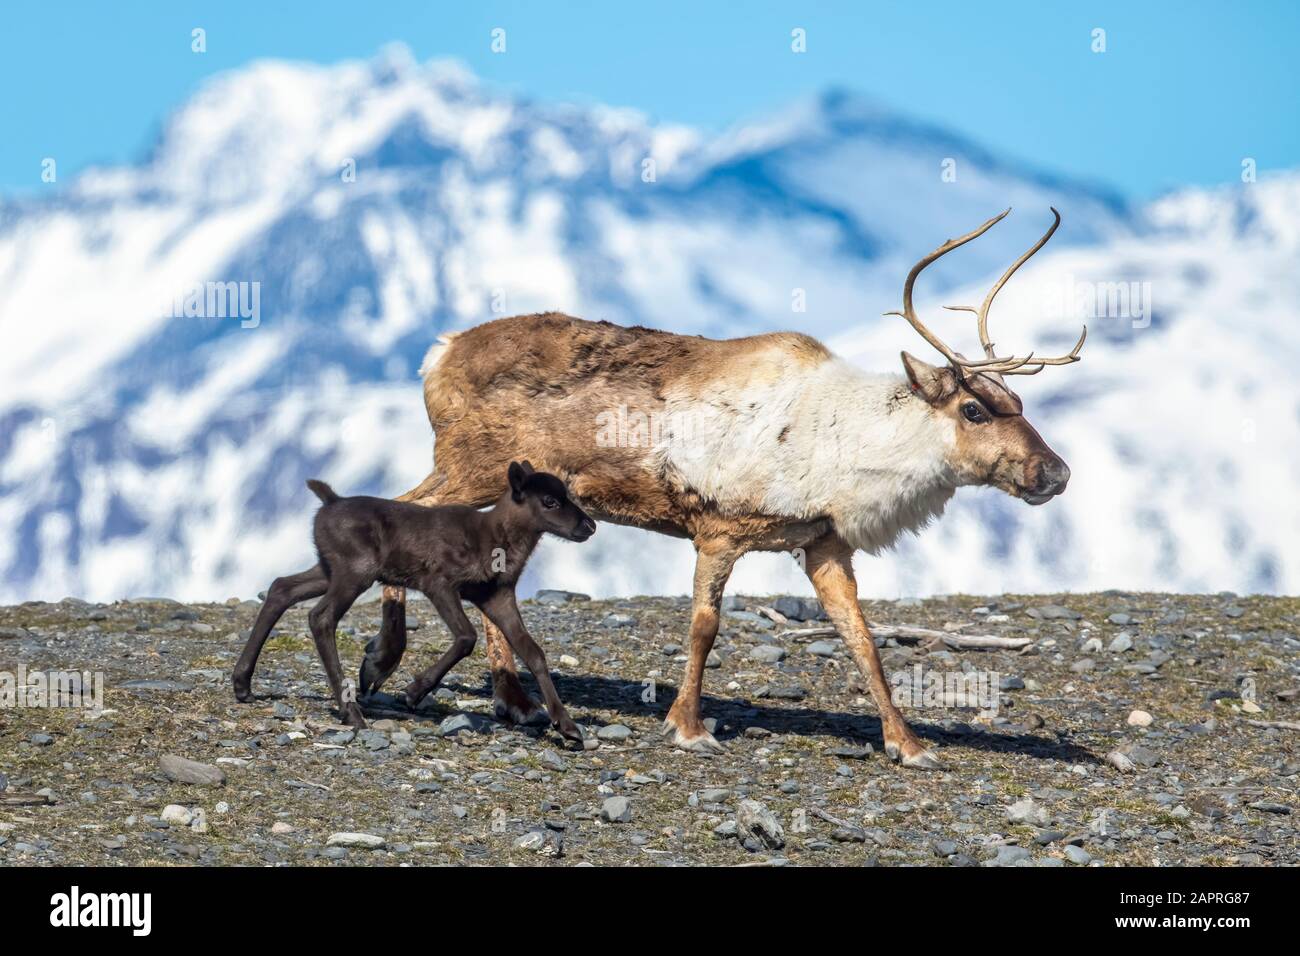 A reindeer (Rangifer tarandus) cow with her new calf, calf staying very close to protective cow, Alaska Wildlife Conservation Center Stock Photo